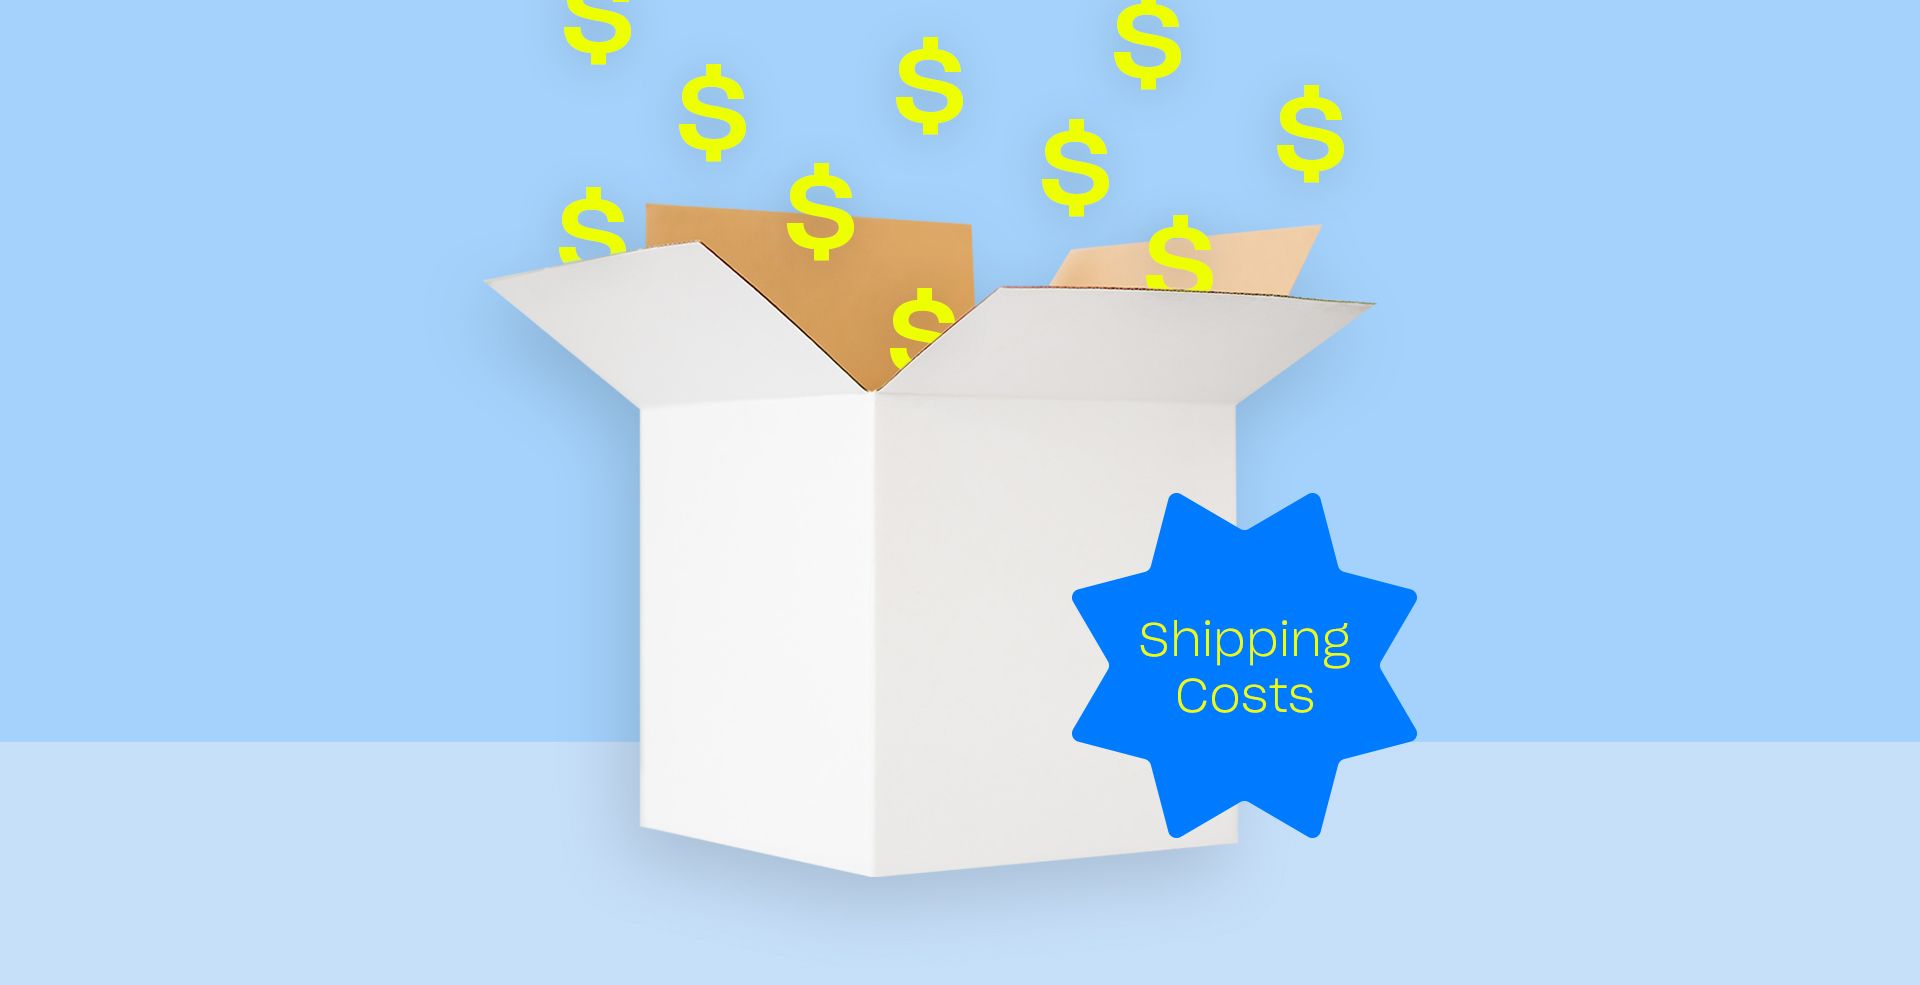 Cost of shipping: Calculating your shipping costs